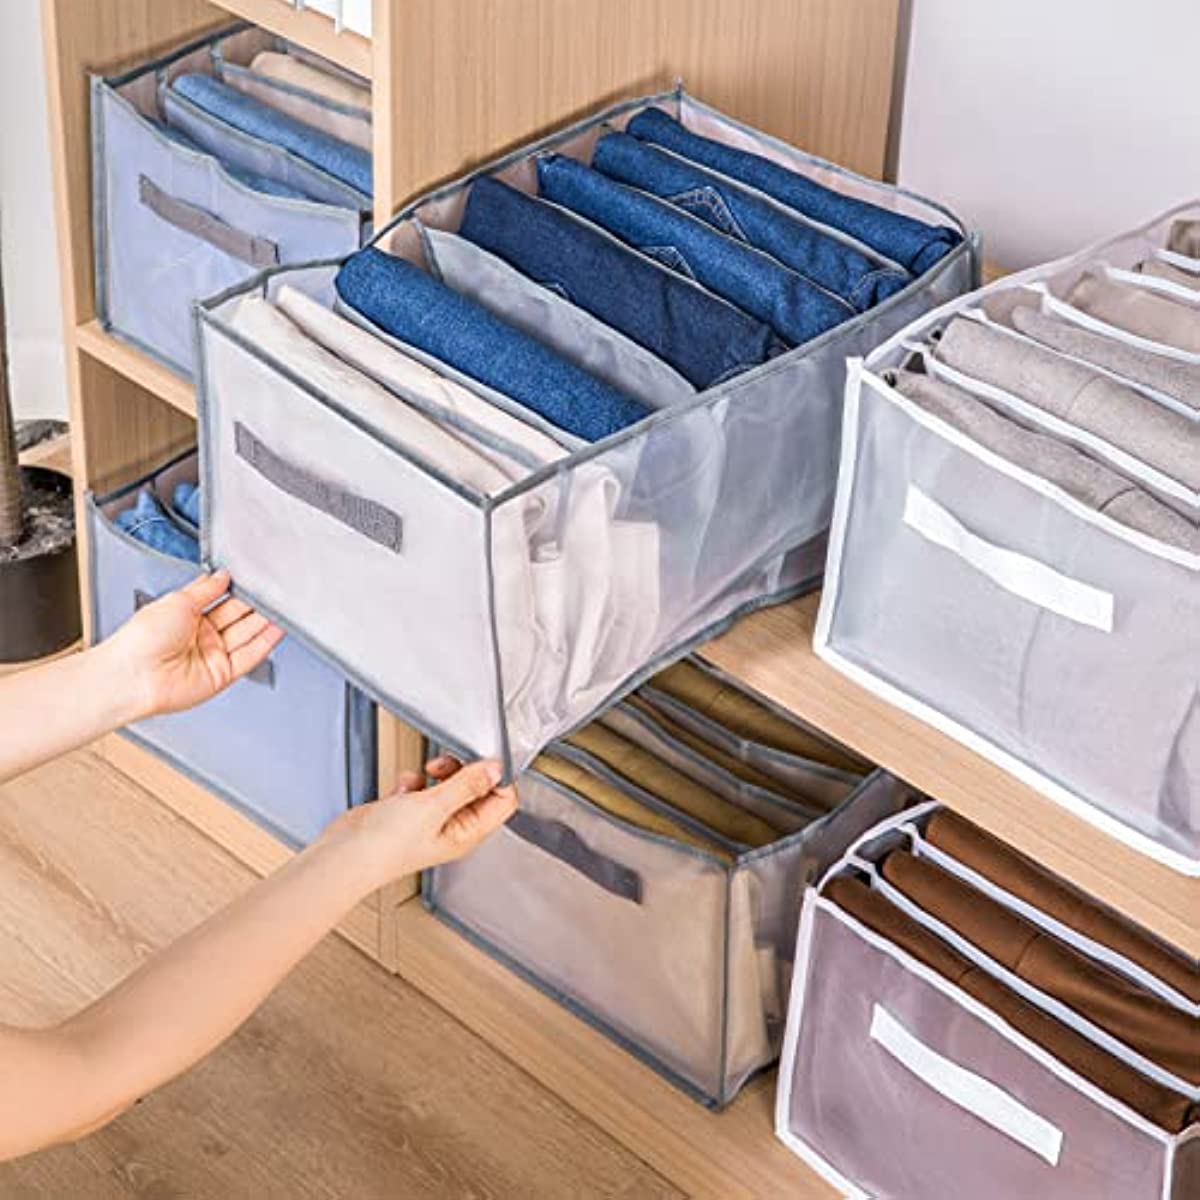 

1pc Jeans Wardrobe Clothes Organizer, 7 Grid Mesh Closet Shelf Organizers For Jeans Pants T-shirts, With Handle Foldable Drawer Storage Box Bedroom